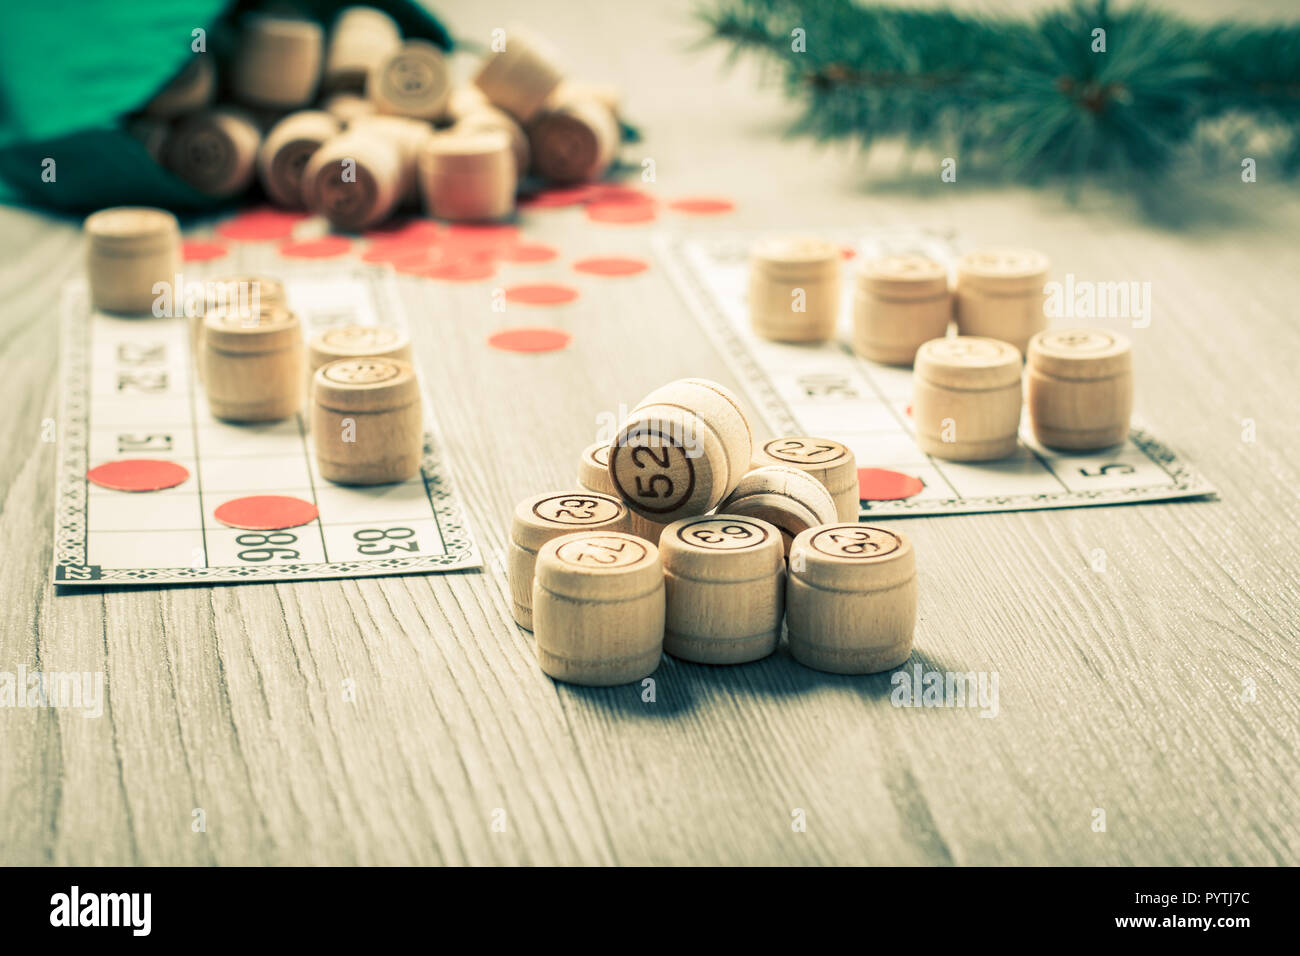 Board game lotto. Wooden lotto barrels with green bag, game cards and Christmas fir tree branches. Color toning effect. Stock Photo